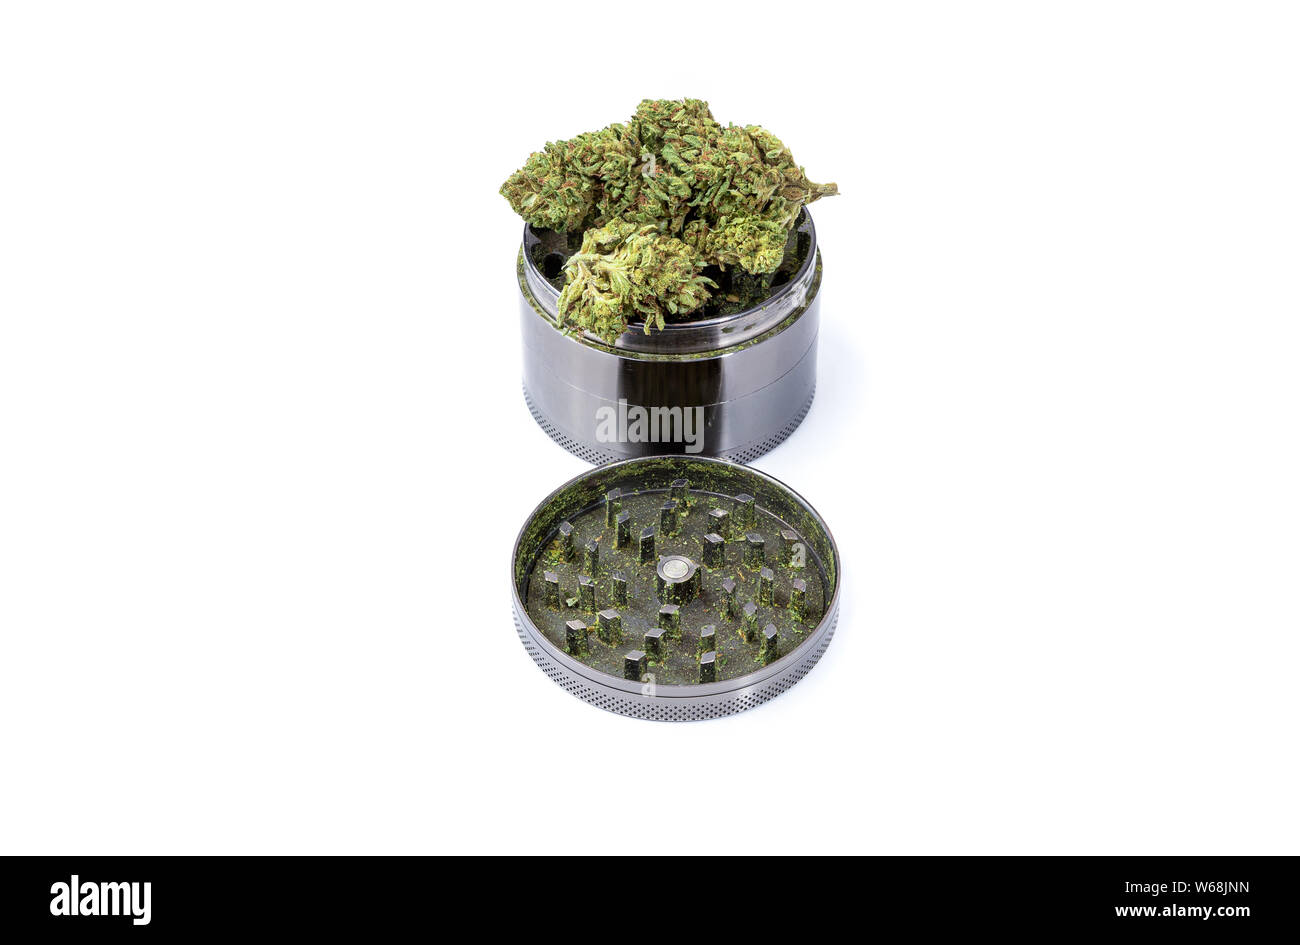 Close up, detailed photo of medical marijuana buds on top of a steel grinder against a white background Stock Photo